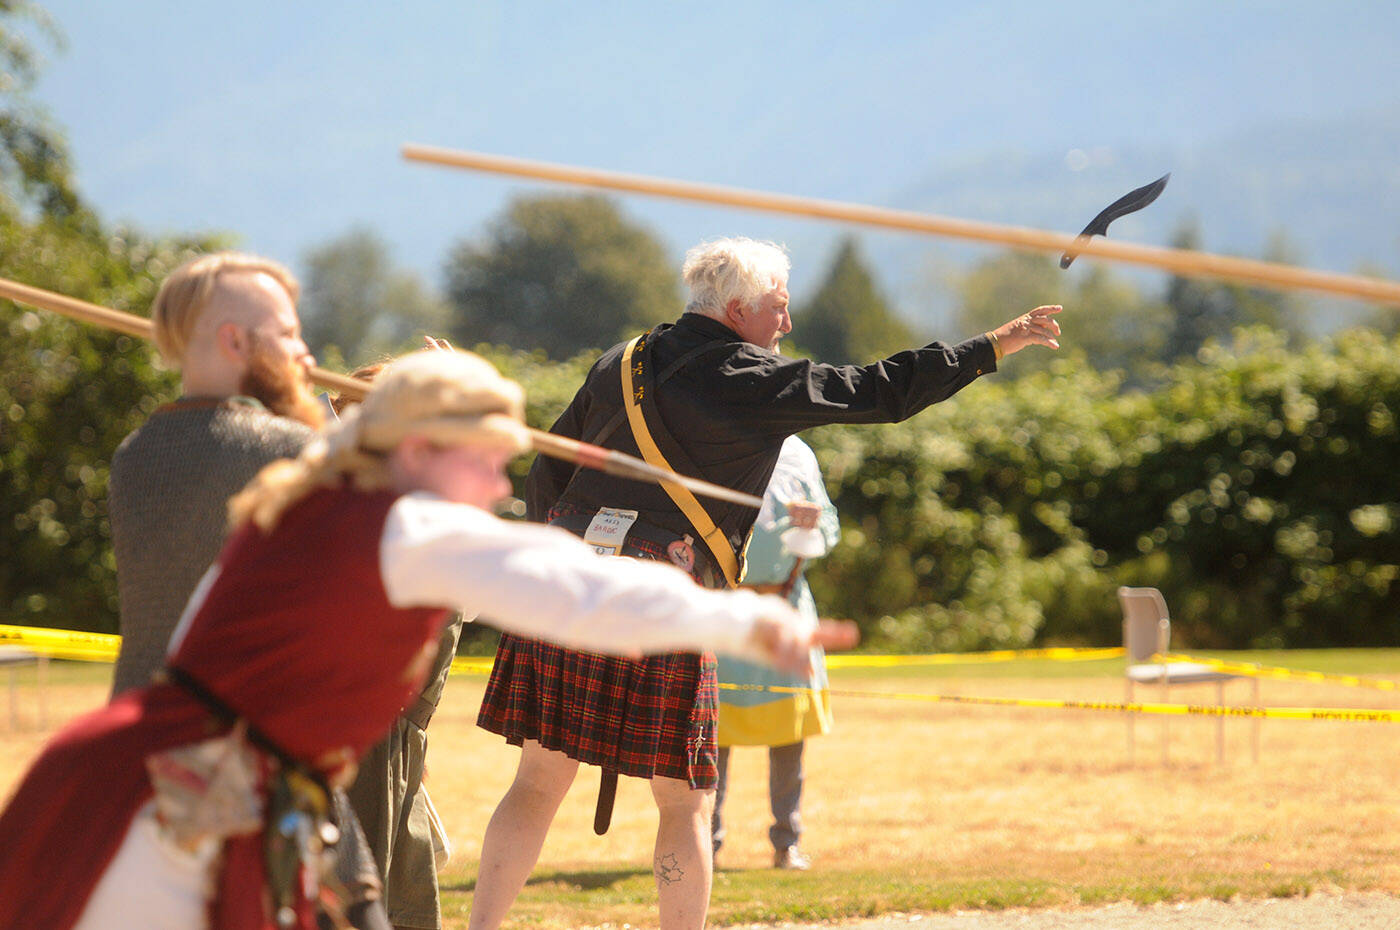 Members of the Society for Creative Anachronism (SCA) gathered for the Summer Faire event, hosted by the local branch called the Shire of Lionsdale, on Saturday, Aug. 6, 2022 at Atchelitz Hall in Chilliwack. The event featured archery, thrown weapons, rapier fighting, armoured combat and the Bardic arts. (Jenna Hauck/ Chilliwack Progress)